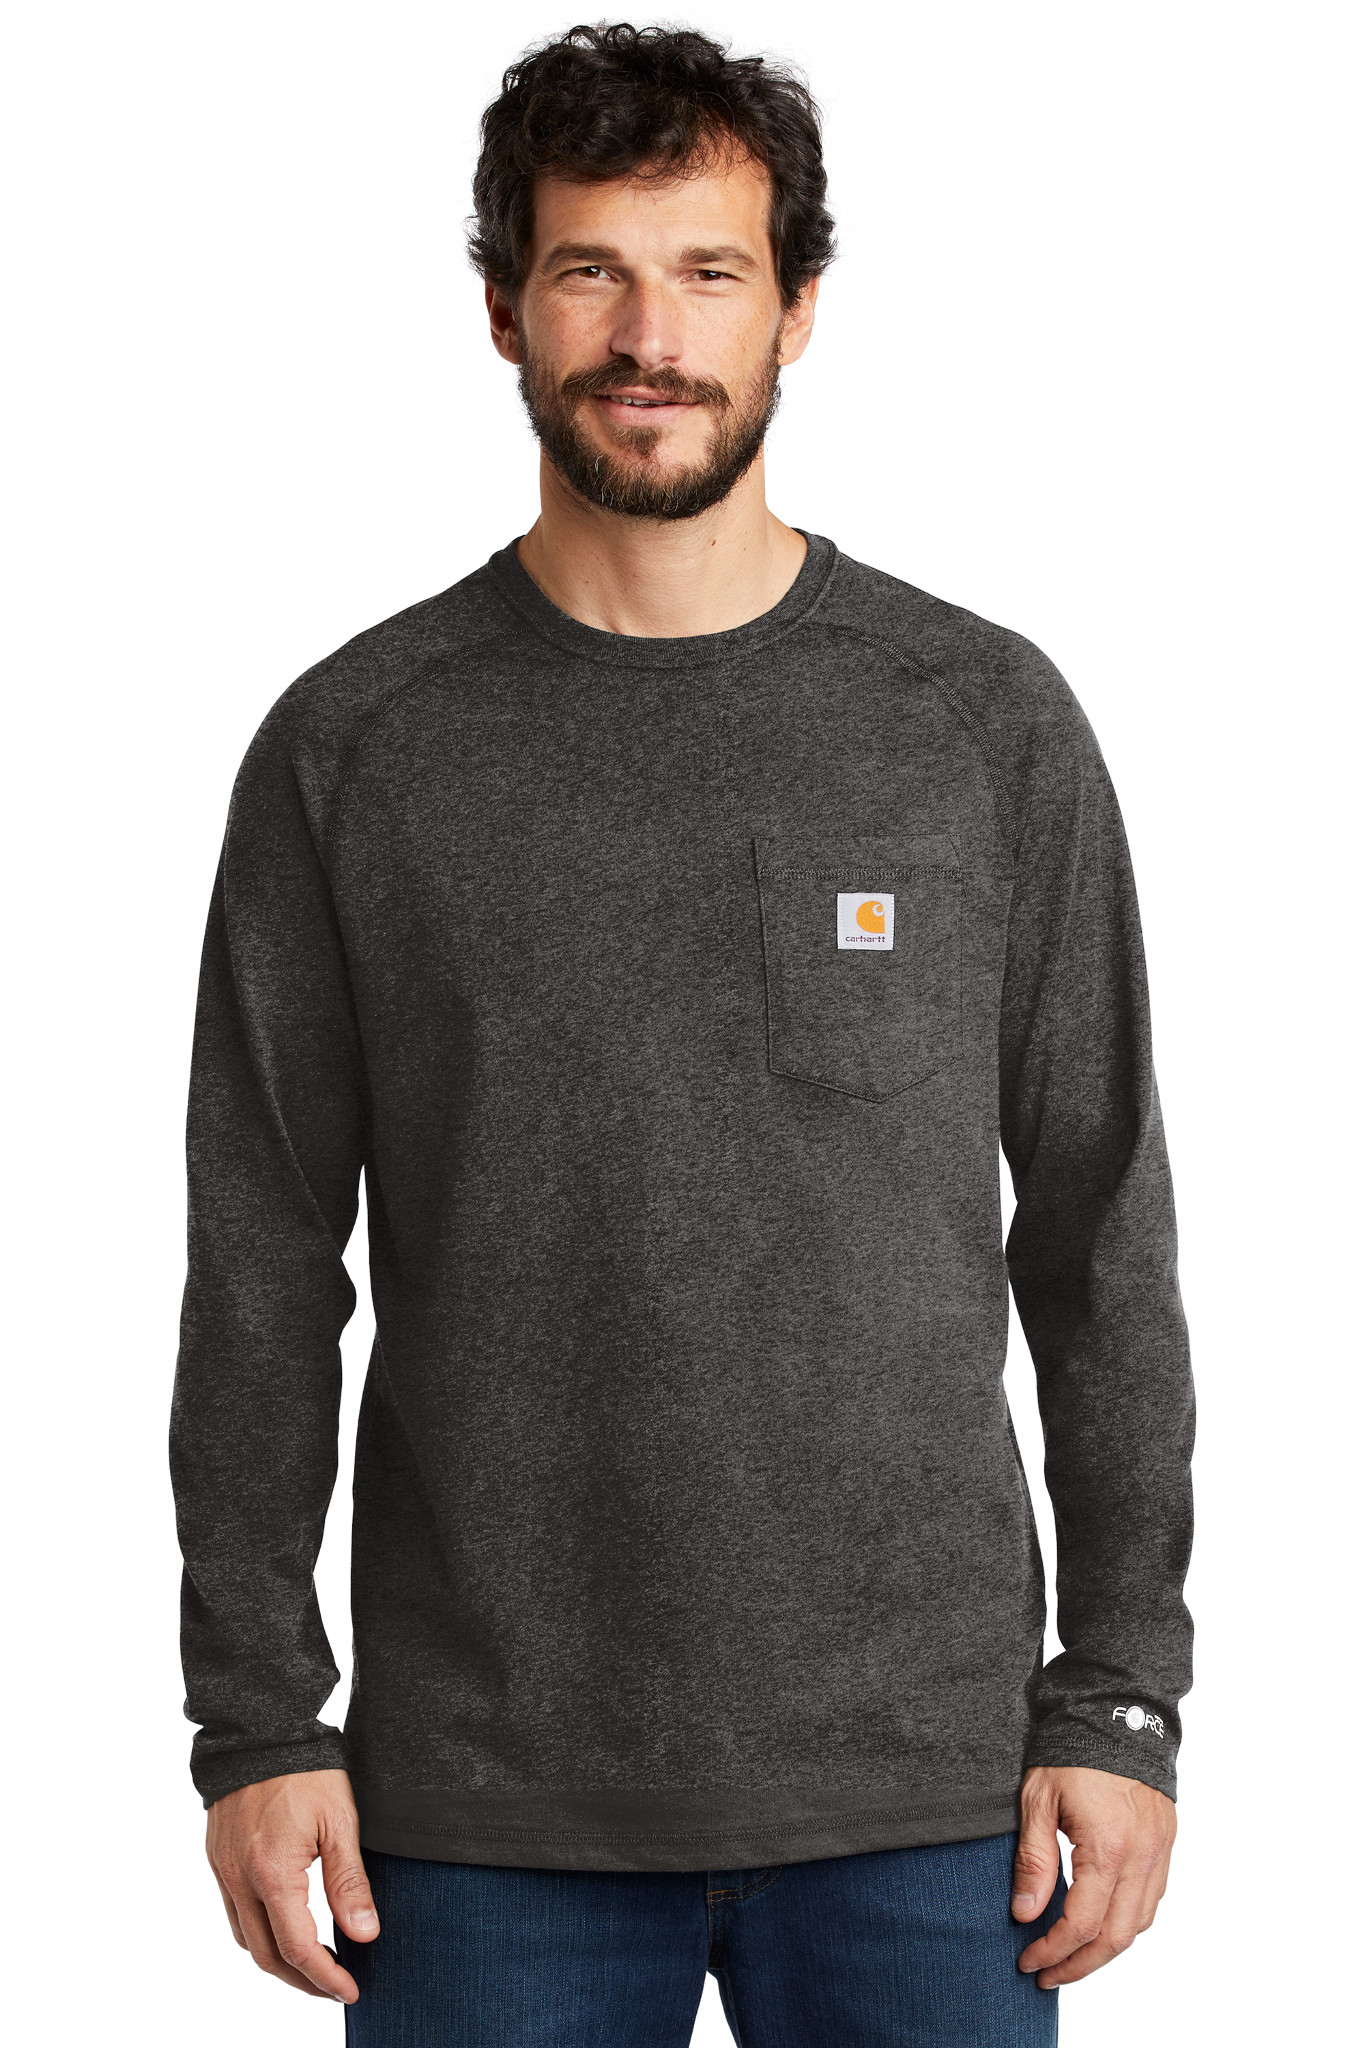 Carhartt Force ® Cotton Delmont Long Sleeve T-Shirt coming spring ...